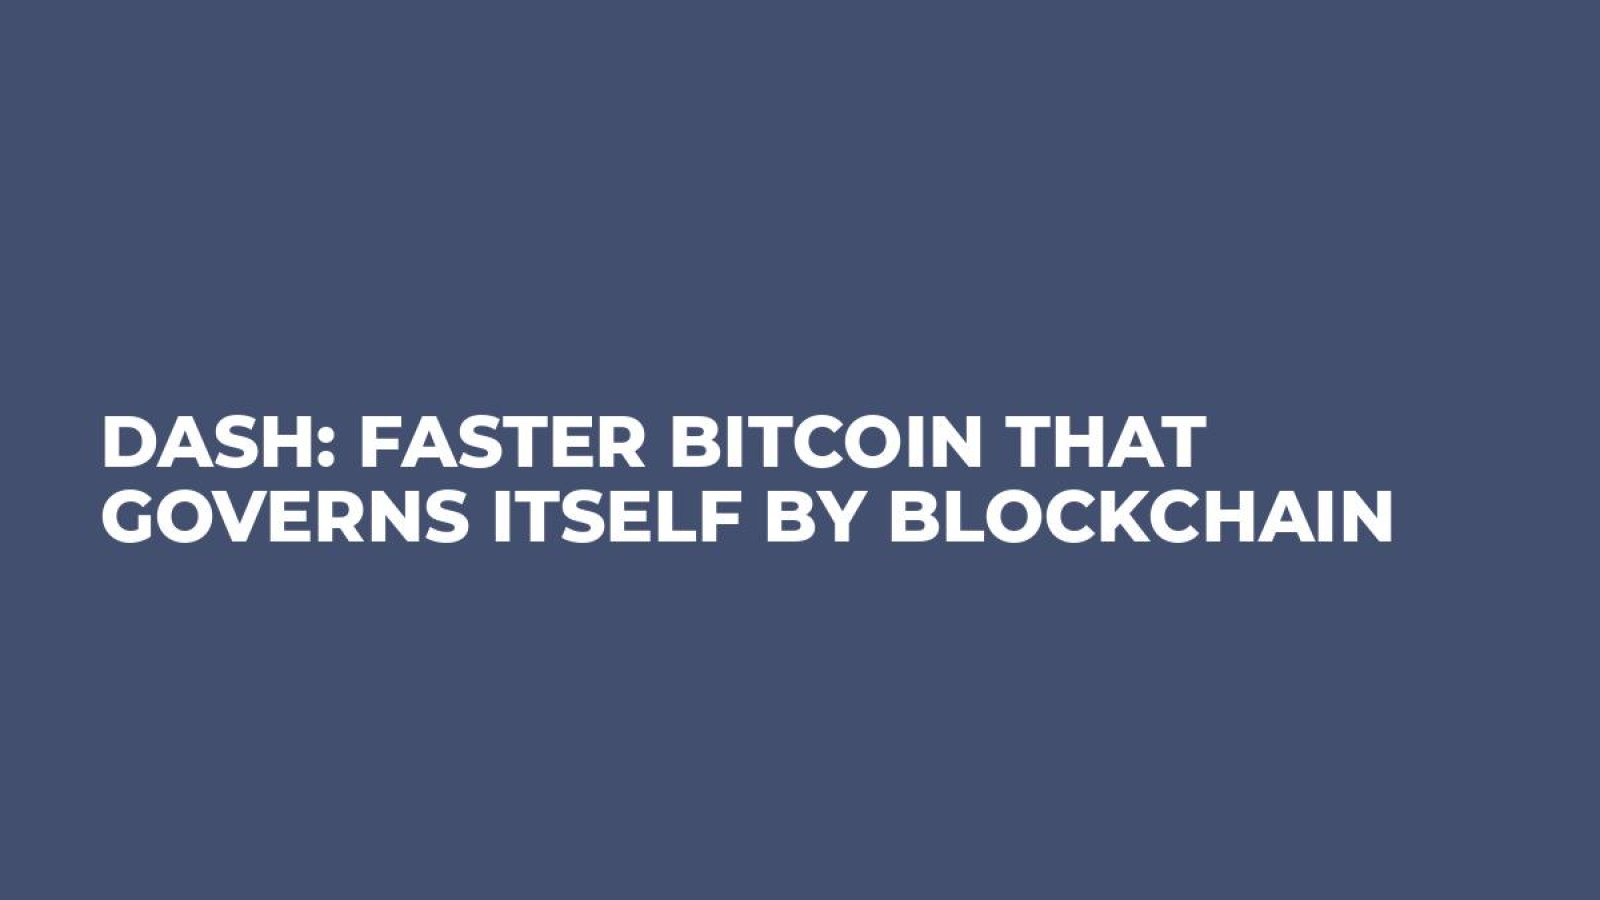 Dash: Faster Bitcoin That Governs Itself by Blockchain